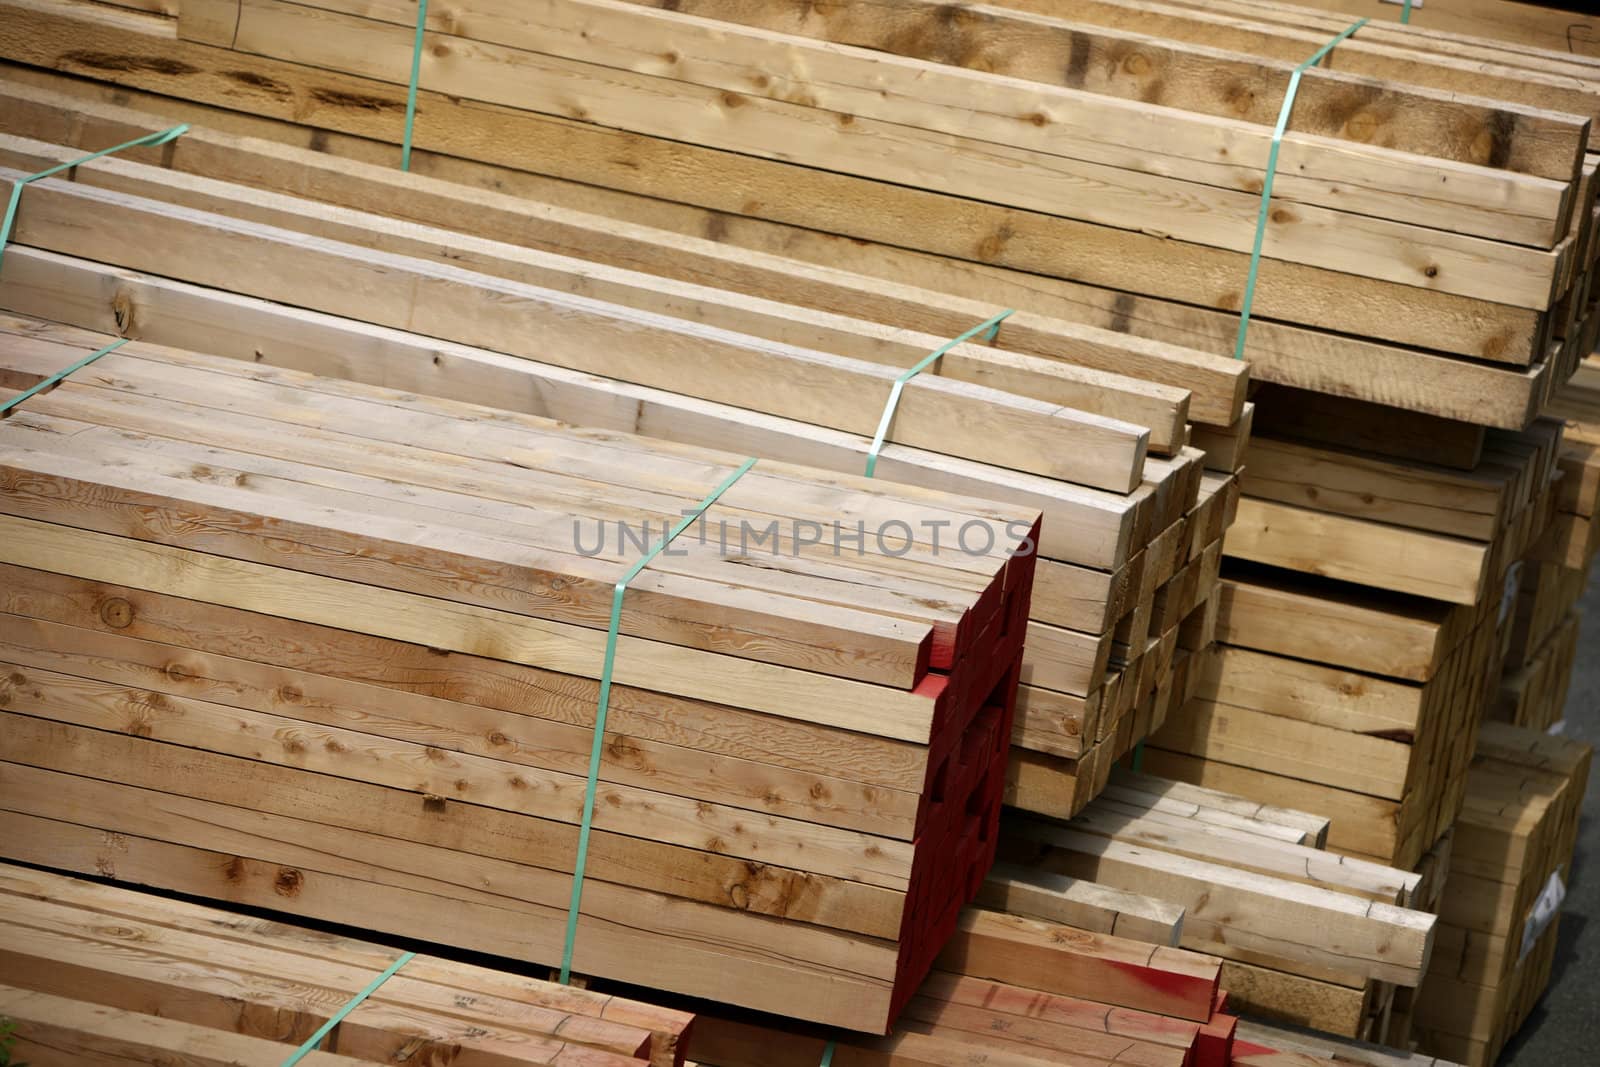 stacks of construction wood at a saw mill